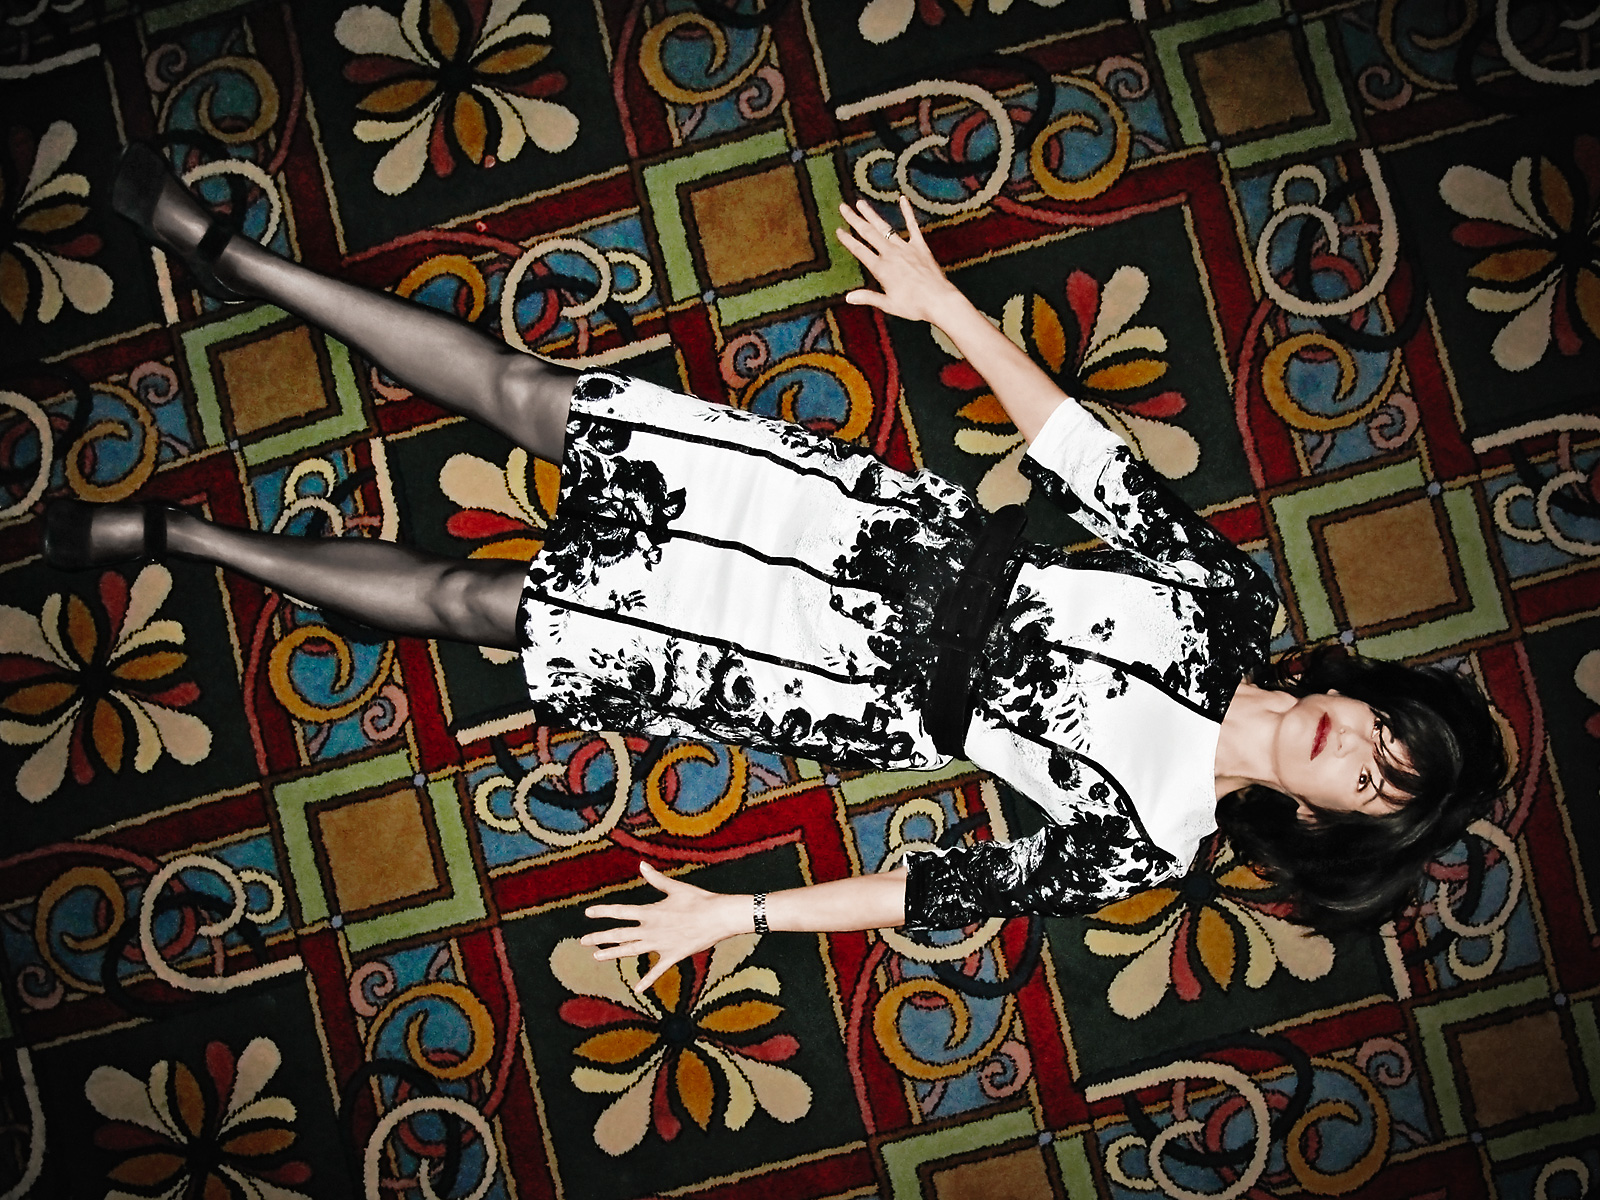 kn-in_print_dress_on_carpeted_floor-stephen-austin-welch-director-photographer